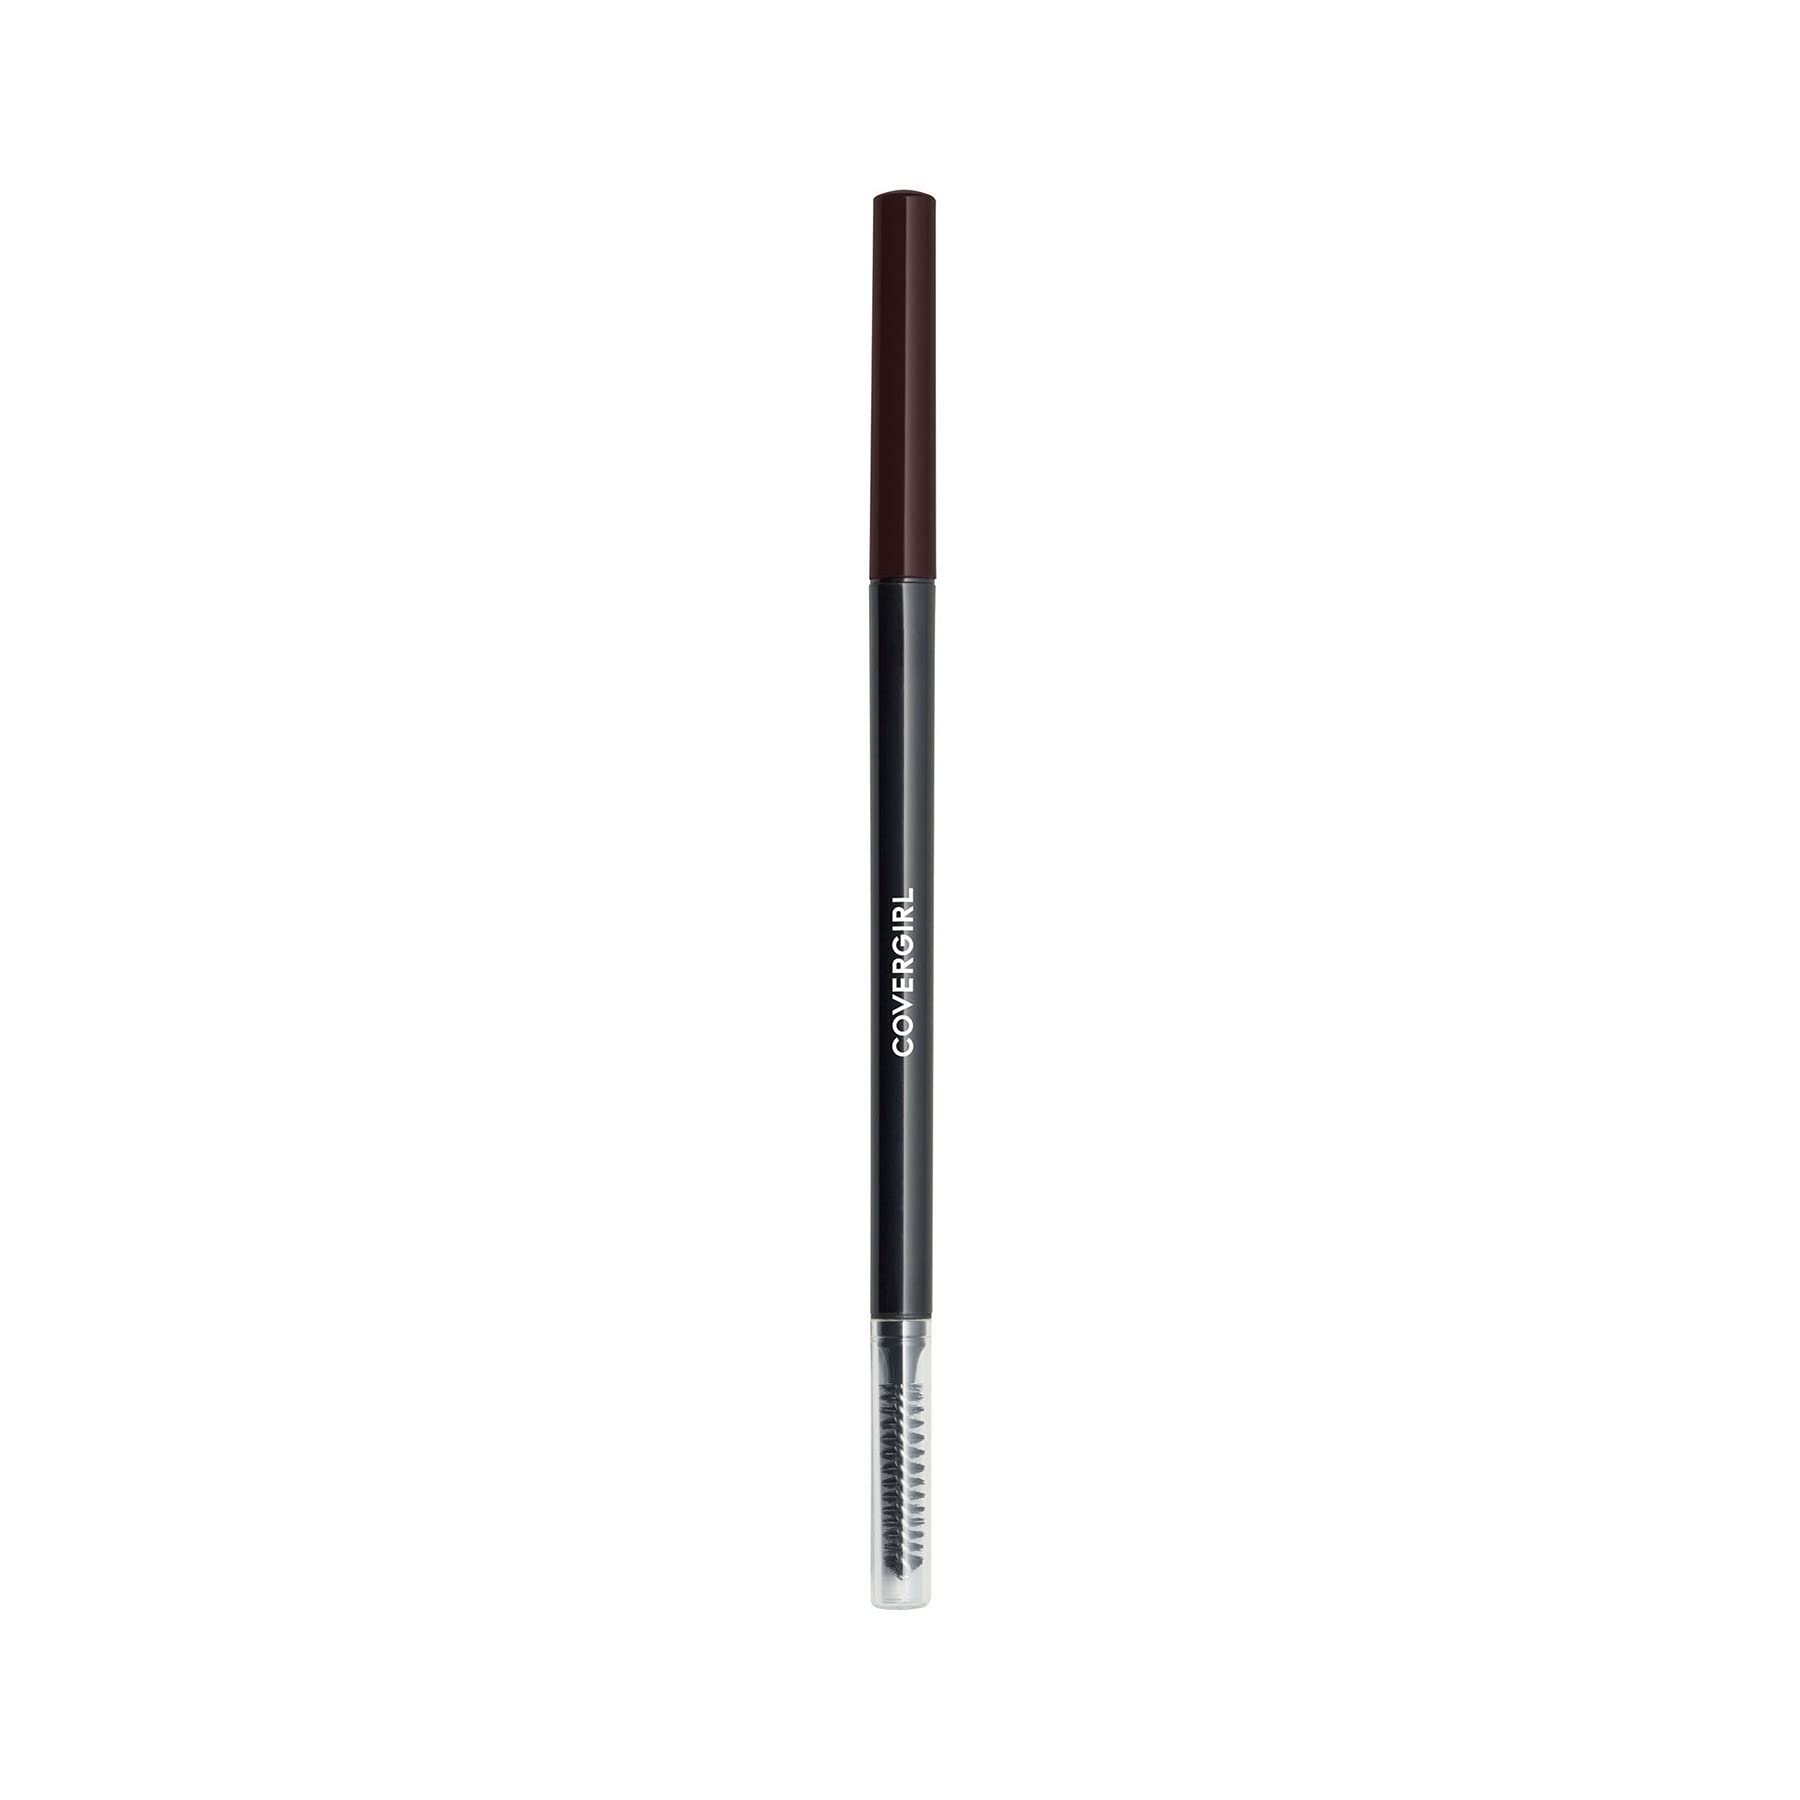 COVERGIRL Easy Breezy Brow Micro-fine & Define Pencil, Rich Brown, Pack of 1 (Packaging May Vary)